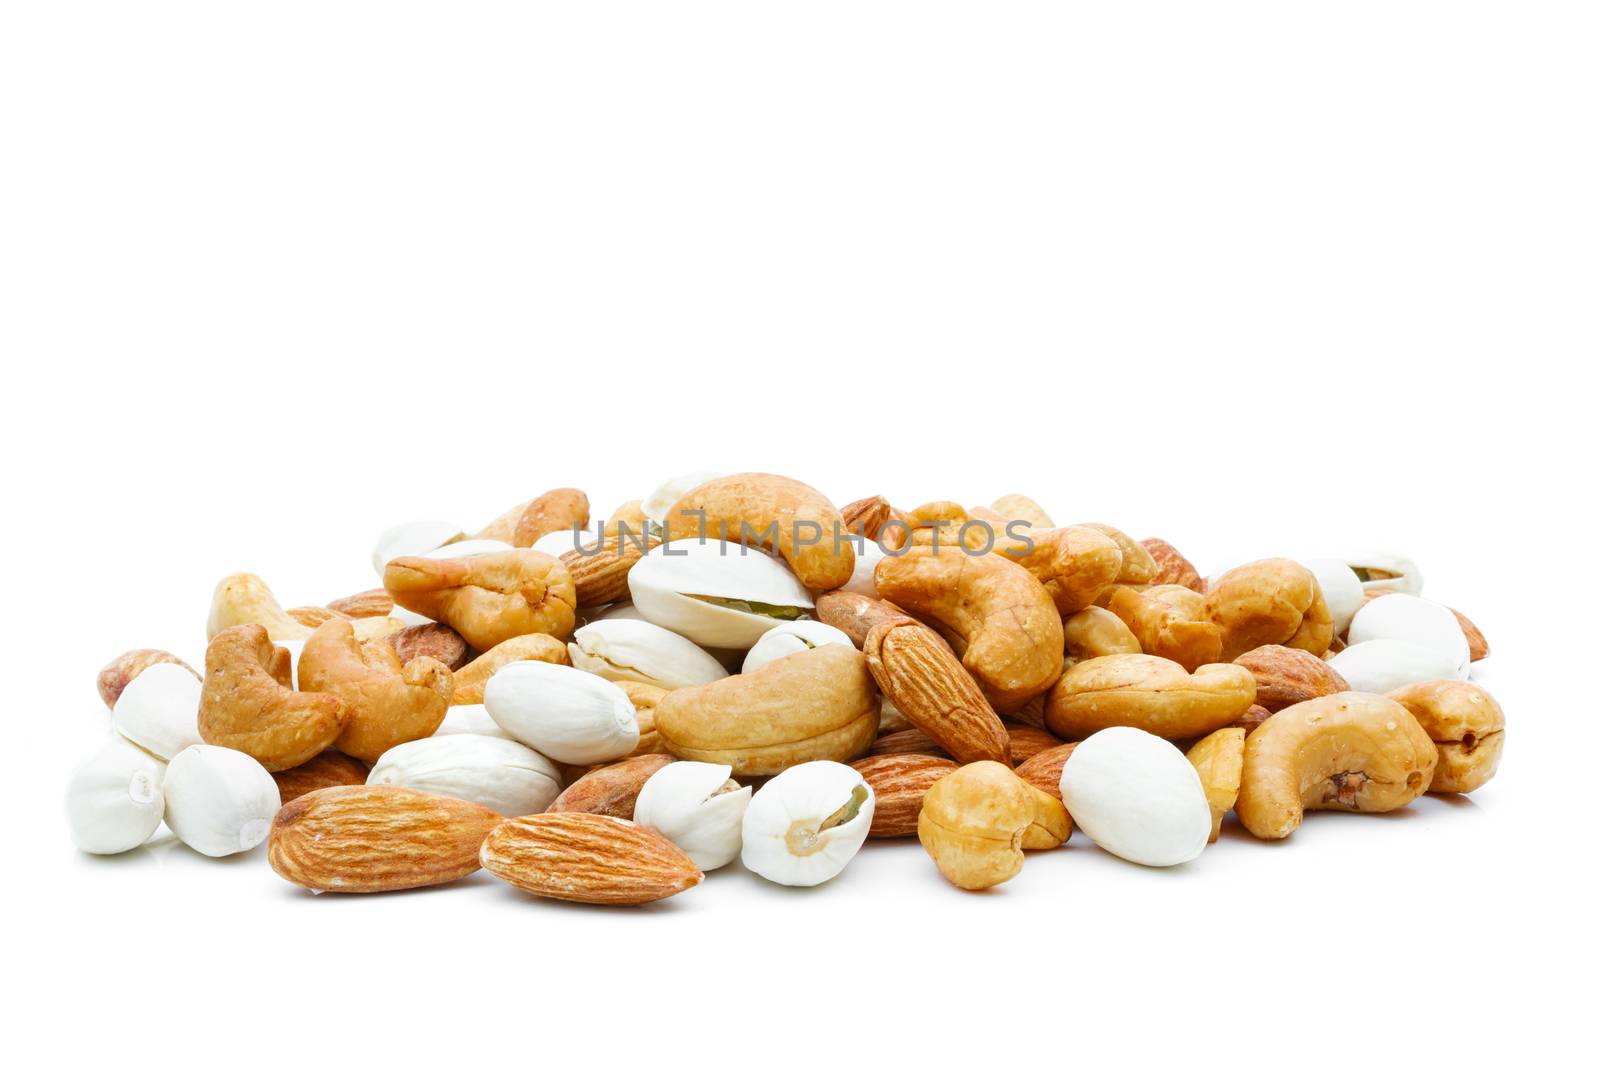 Almonds Pistachio and  Cashews in a sack on a white background